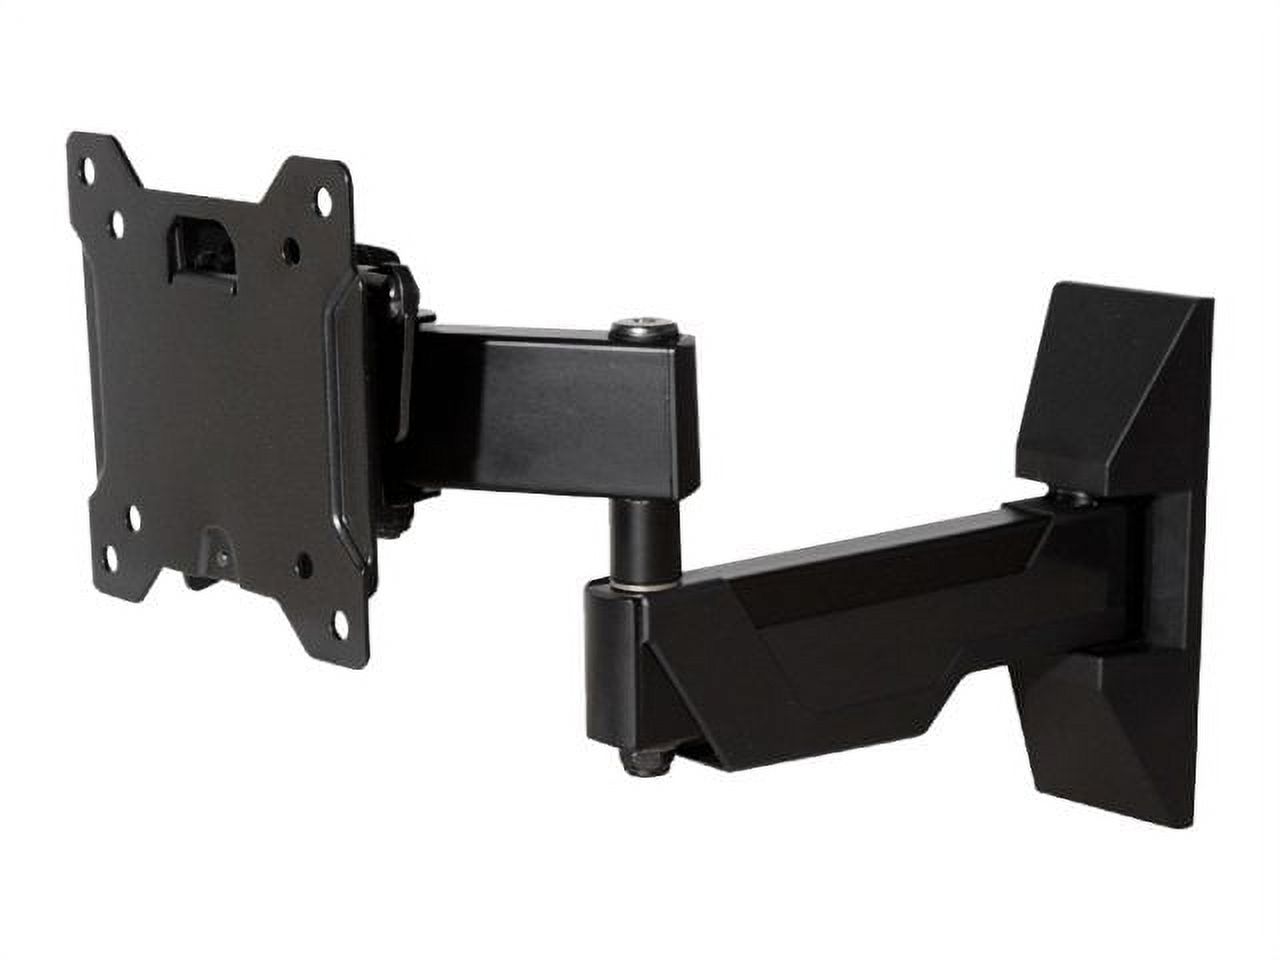 OmniMount OC40FMX - Mounting kit (wall plate, monitor plate, VESA adapter, mounting arm, mounting hardware, wall plate cover) - for flat panel - black powder coat - screen size: 13"-37" - image 1 of 2